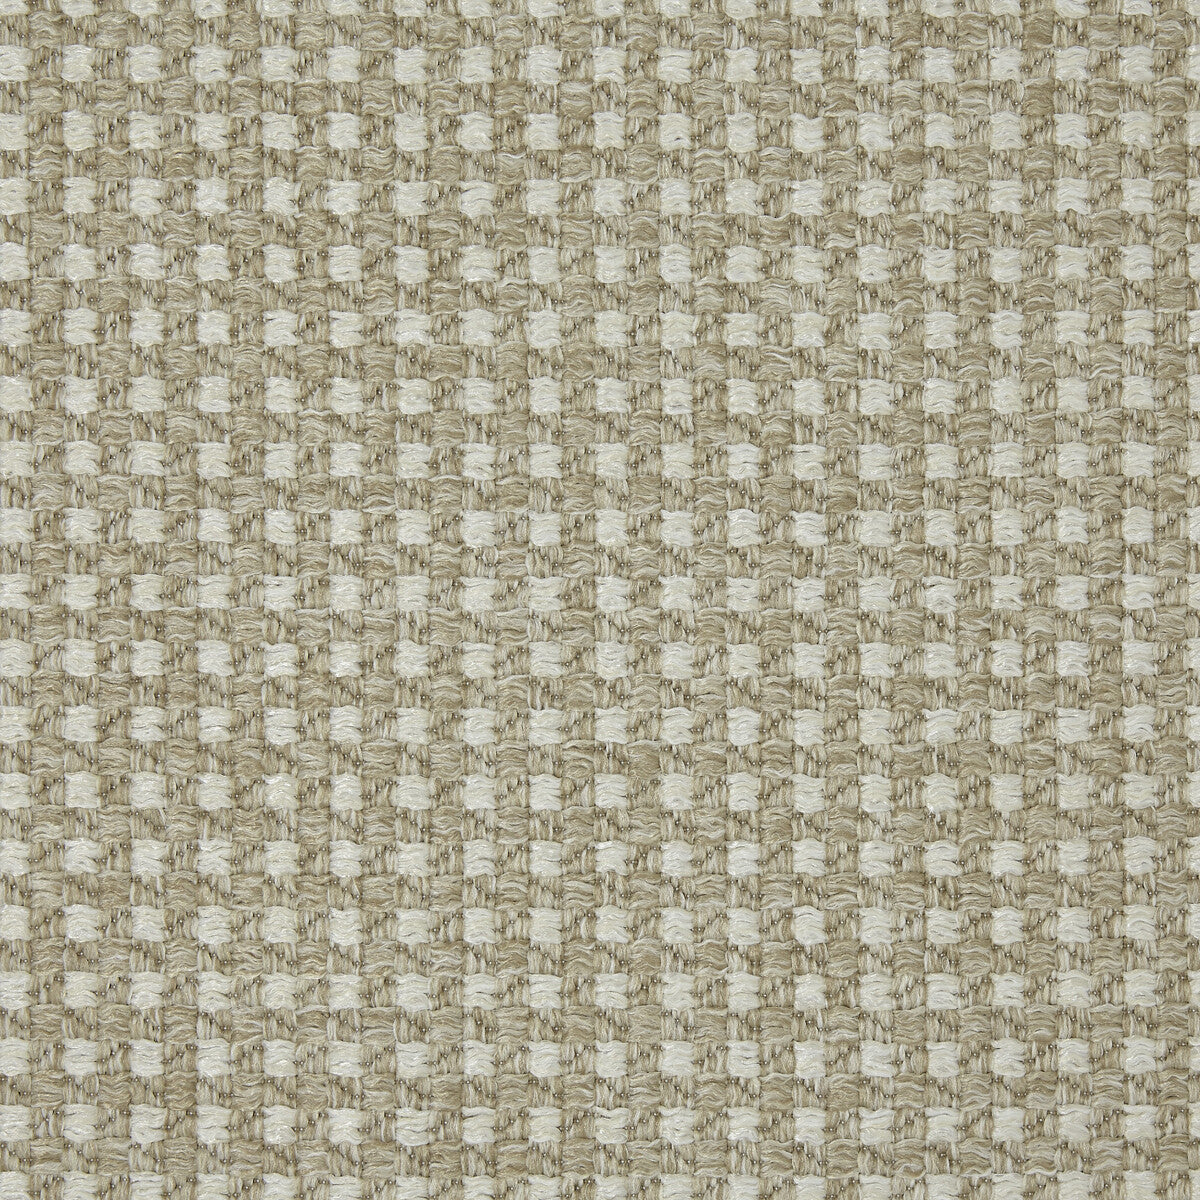 Bovary fabric in 7 color - pattern LZ-30336.07.0 - by Kravet Design in the Lizzo Indoor/Outdoor collection